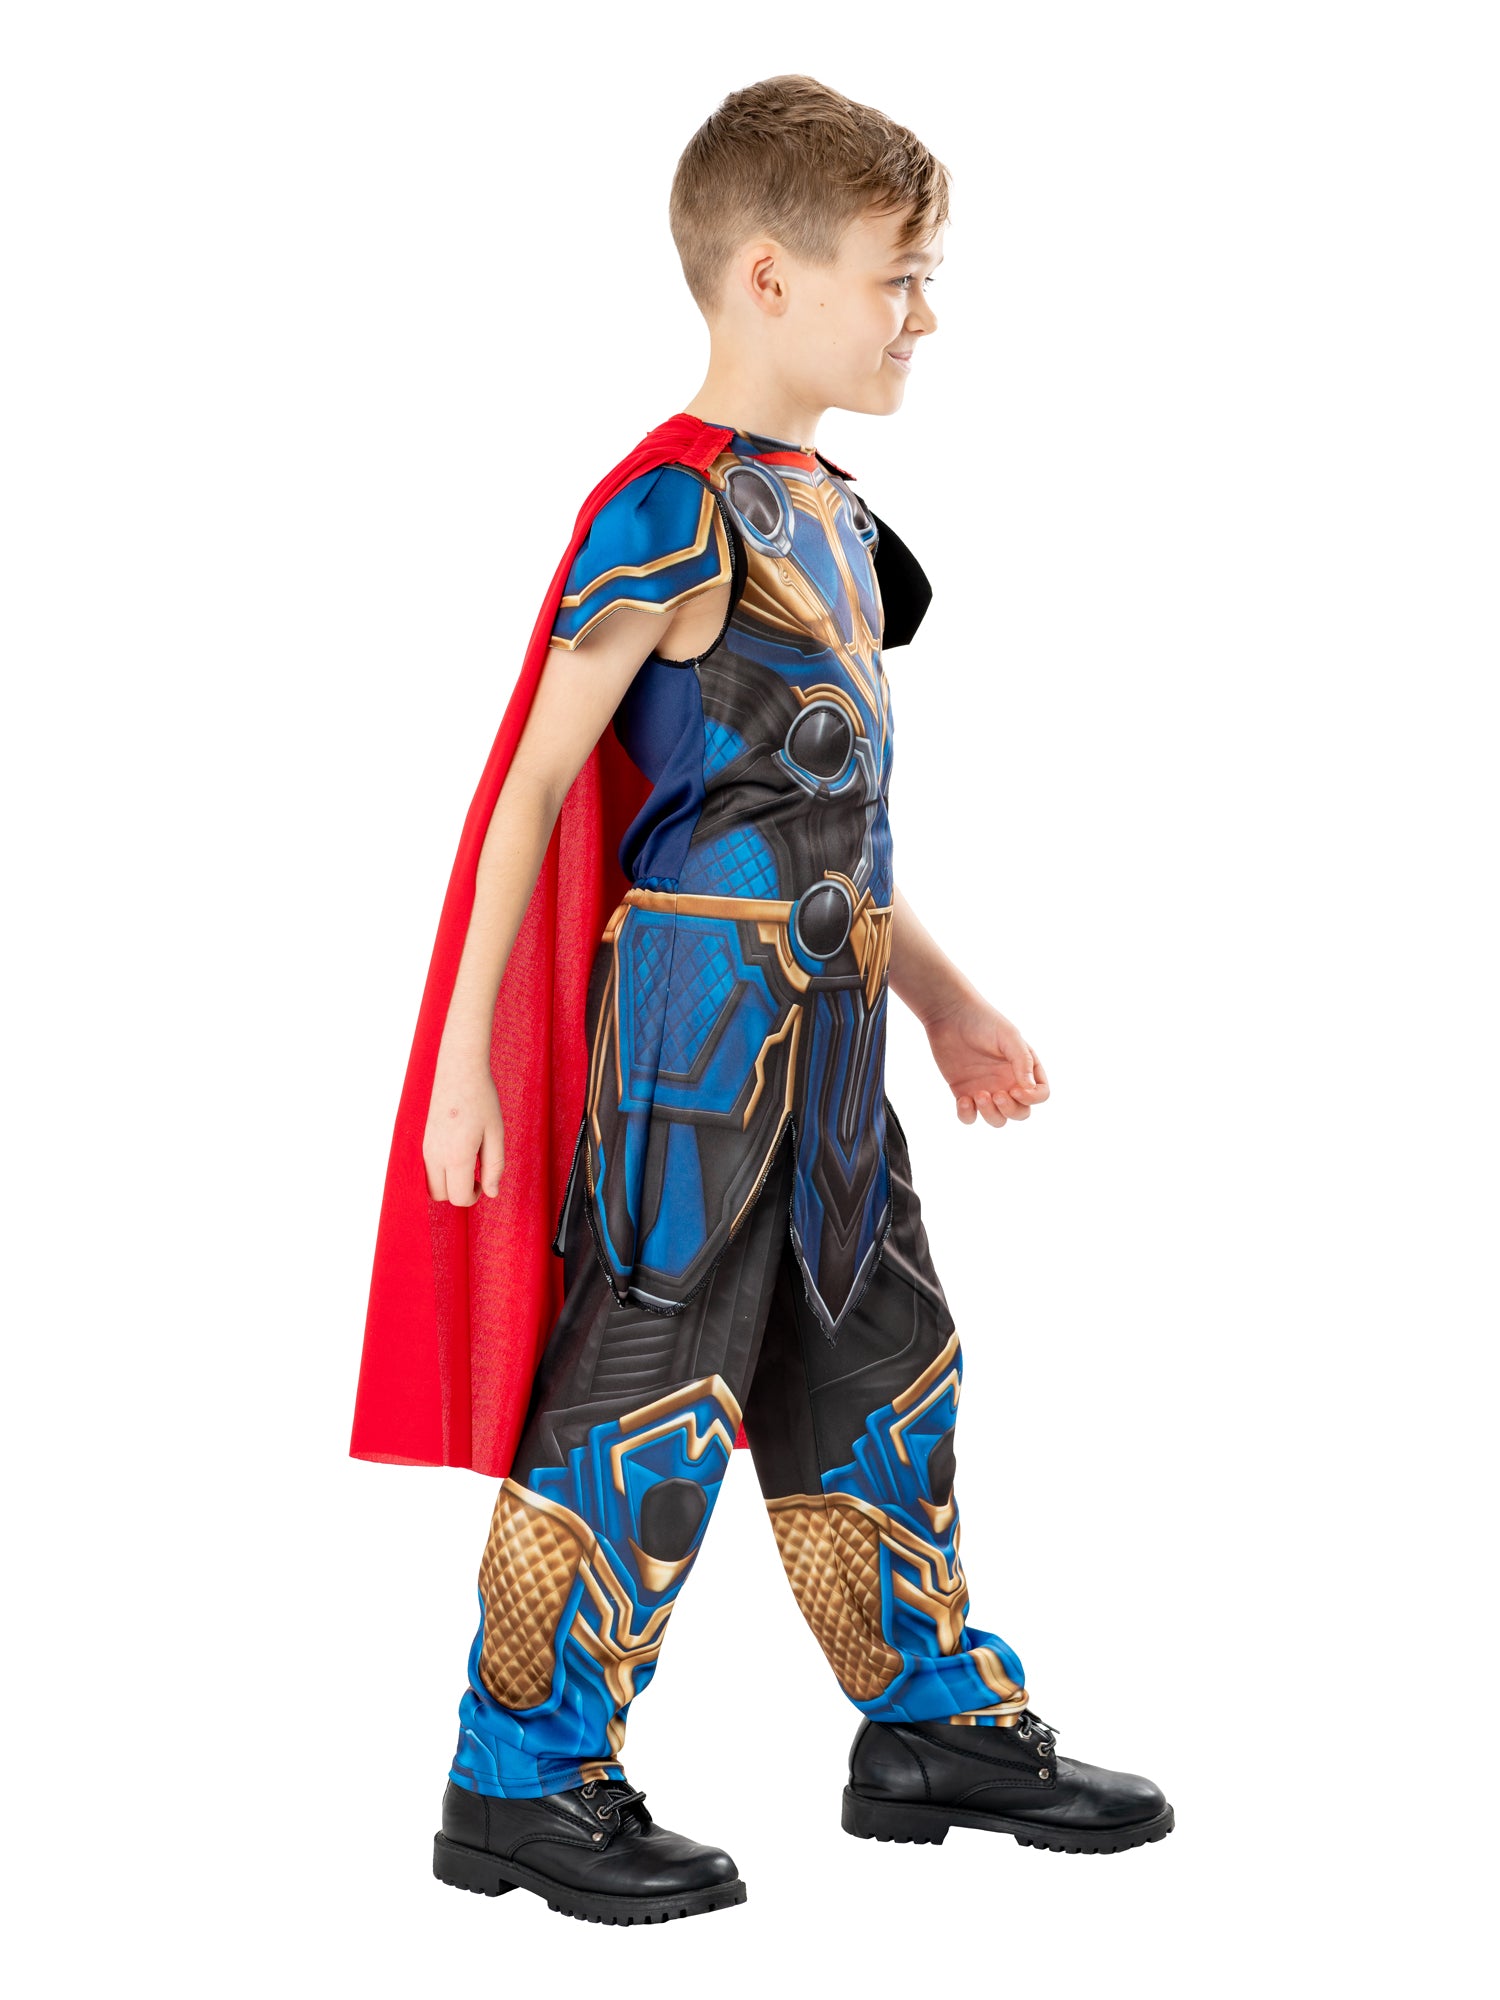 Thor, Avengers, Blue, Marvel, Kids Costumes, 3-4 years, Other